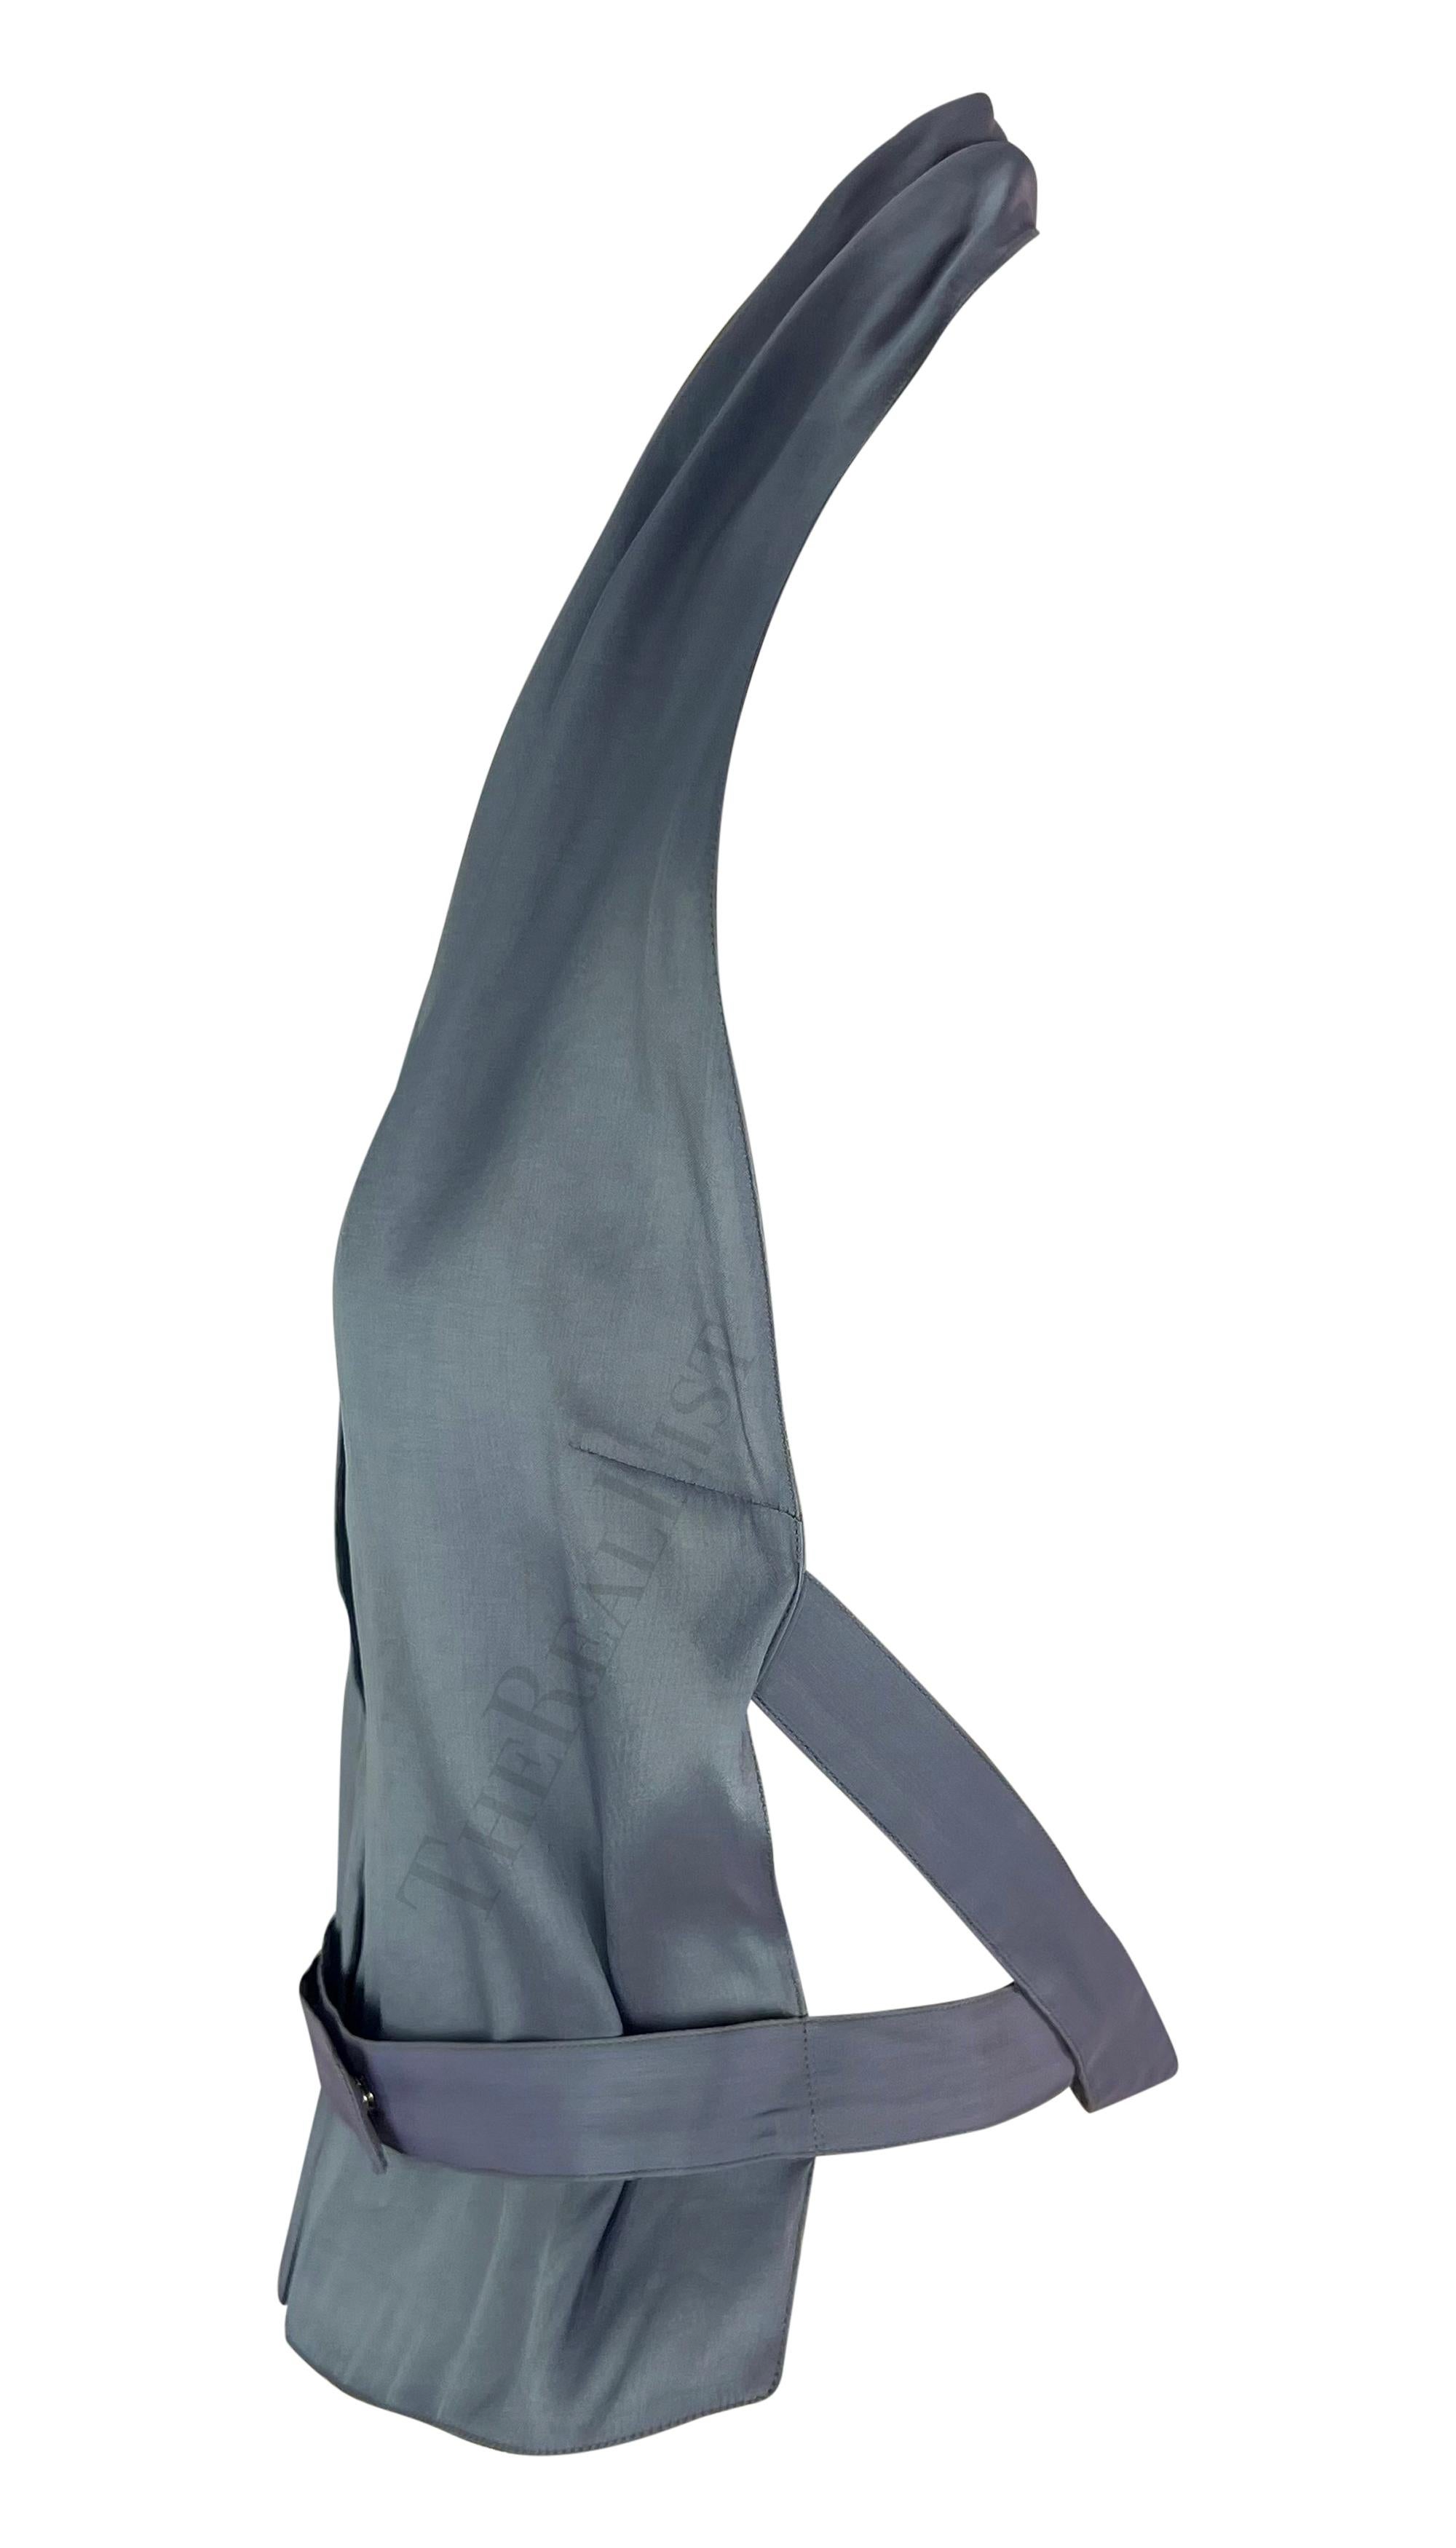 TheRealList presents: a chic light blue silk Giorgio Armani halterneck top. From the late 1990s, this top is constructed entirely of lightweight blue silk. The top features a snap button closure at the front, an exposed back, and straps that wrap